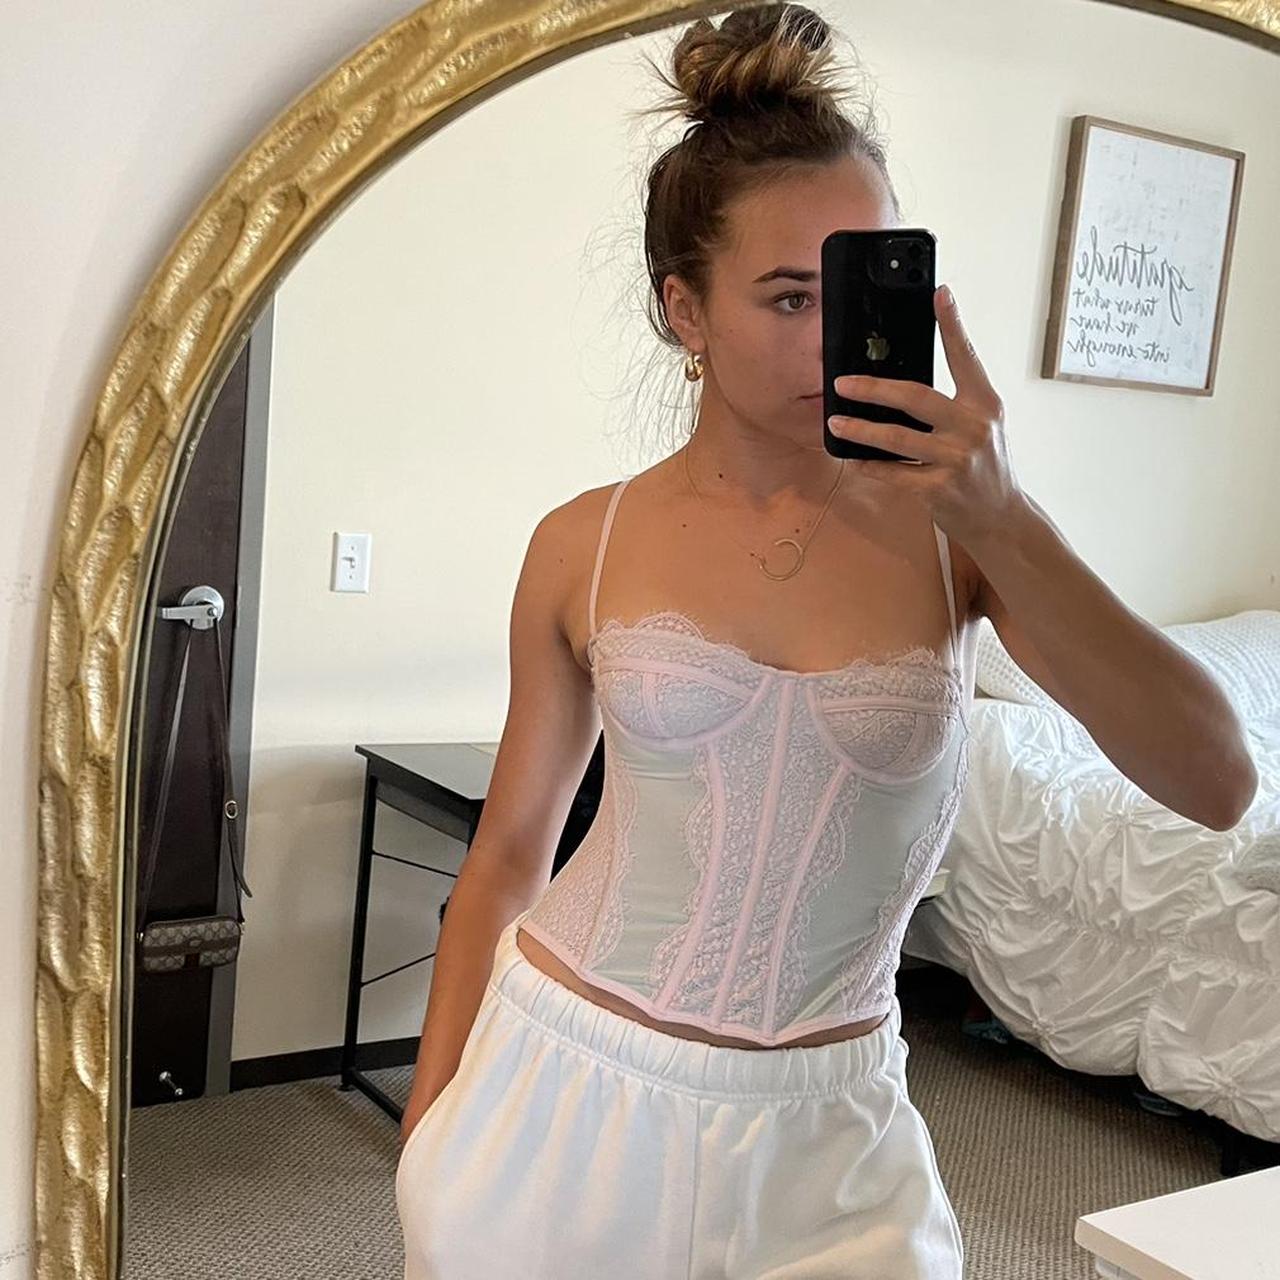 Urban Outfitters Out From Under Modern Love Corset  - Depop